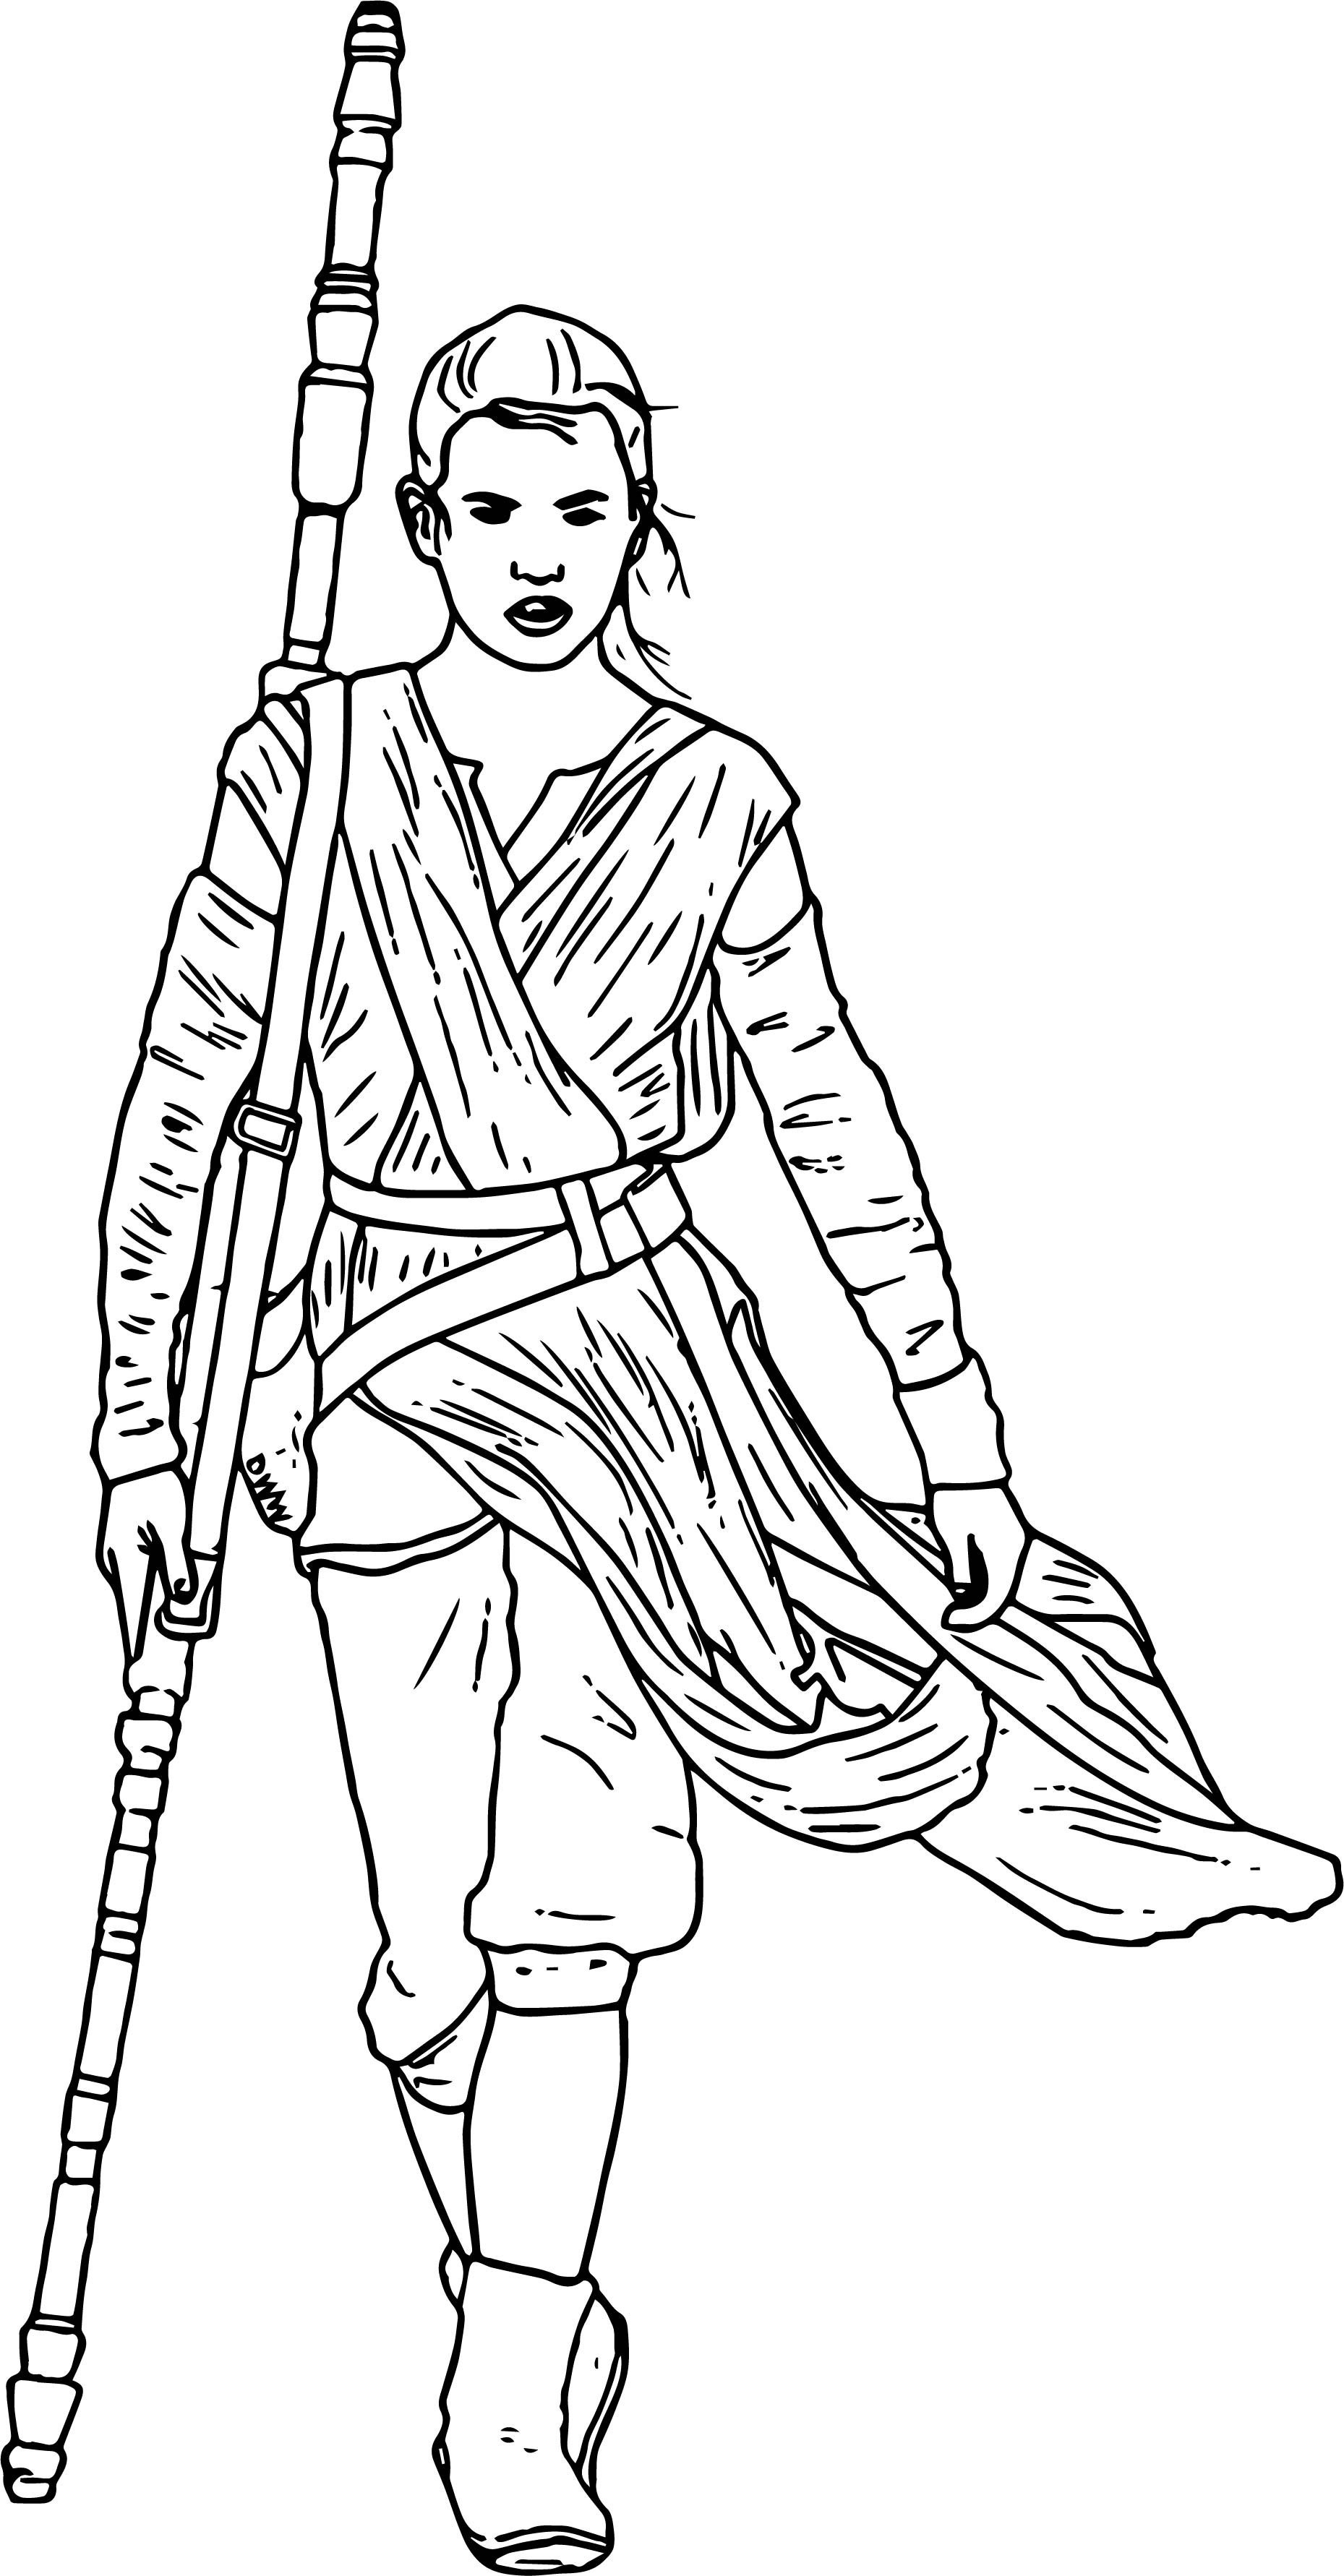 Rey Coloring Page at GetColorings.com | Free printable colorings pages ...